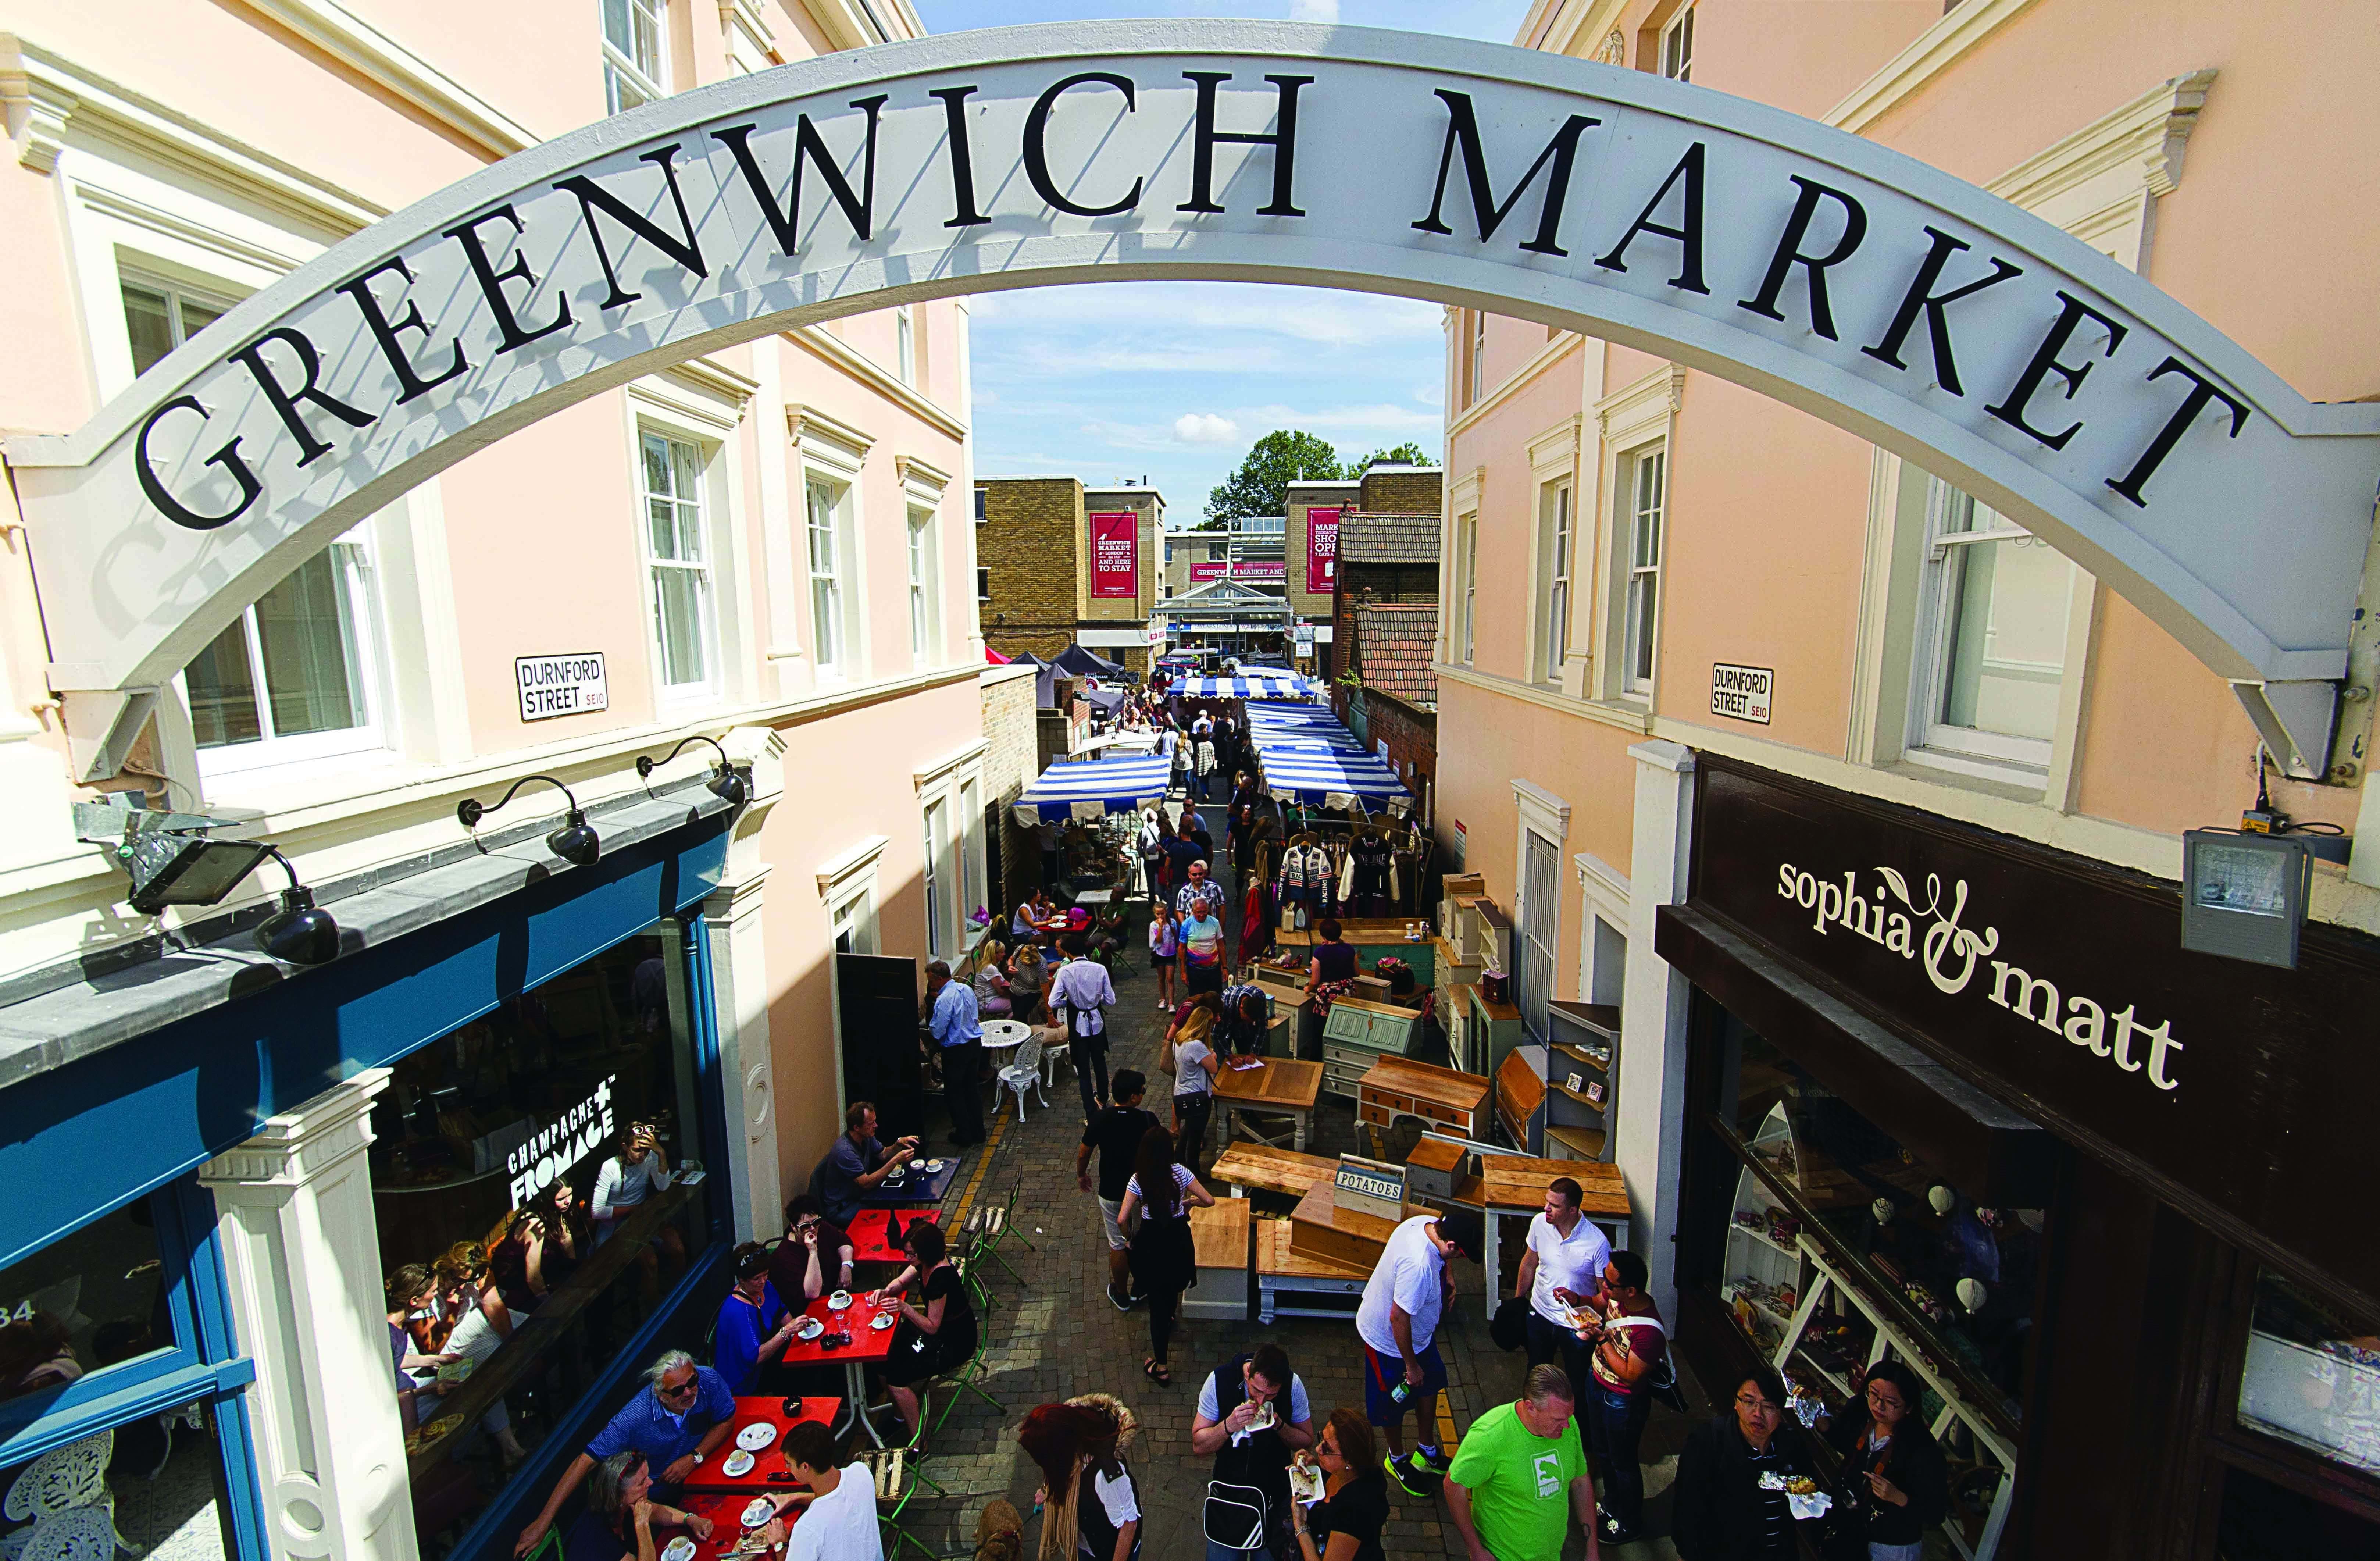 Iconic Greenwich Market packed with restaurants and shops